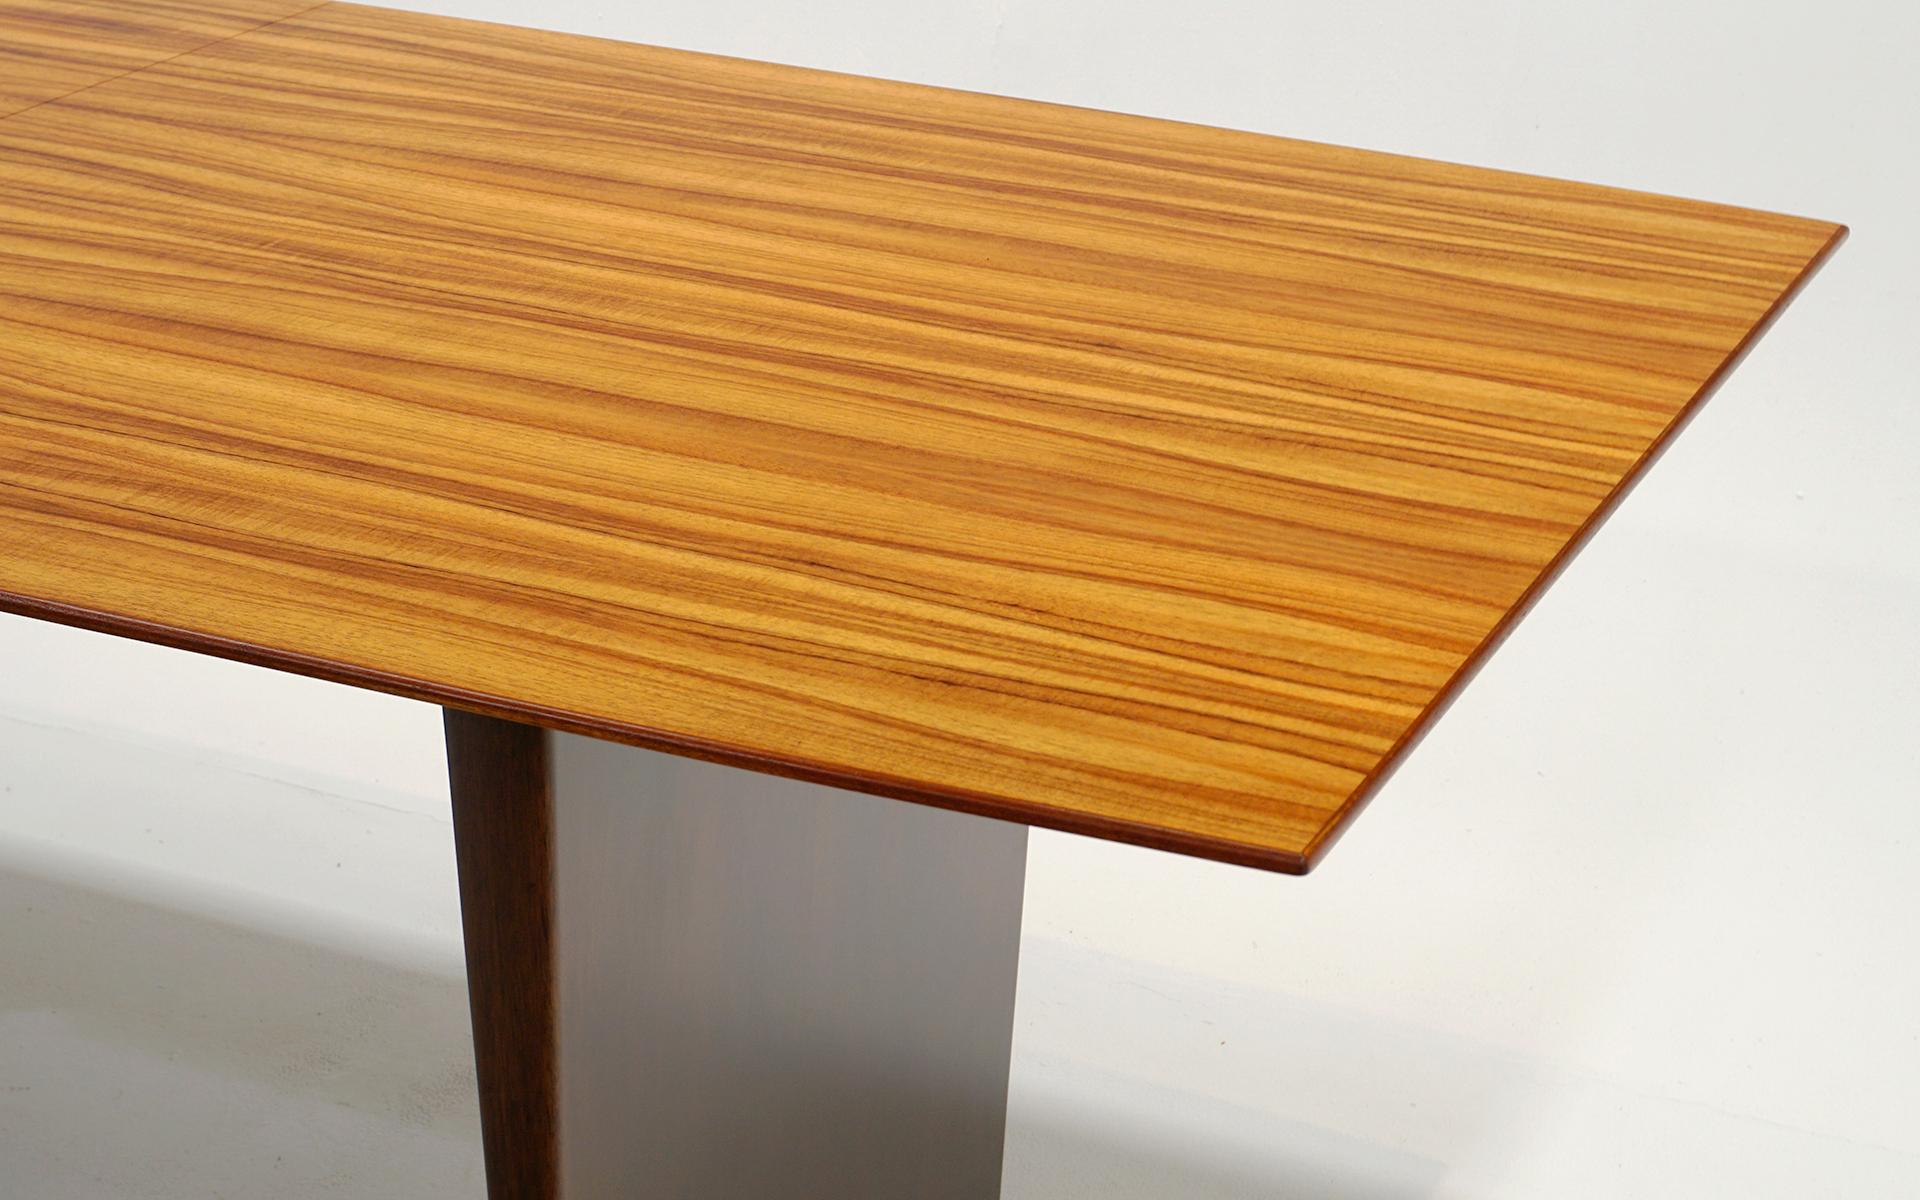 Mid-20th Century Tawi Wood Dining Table by Edward Wormley for Dunbar. Excellent. SEE THE VIDEO! For Sale